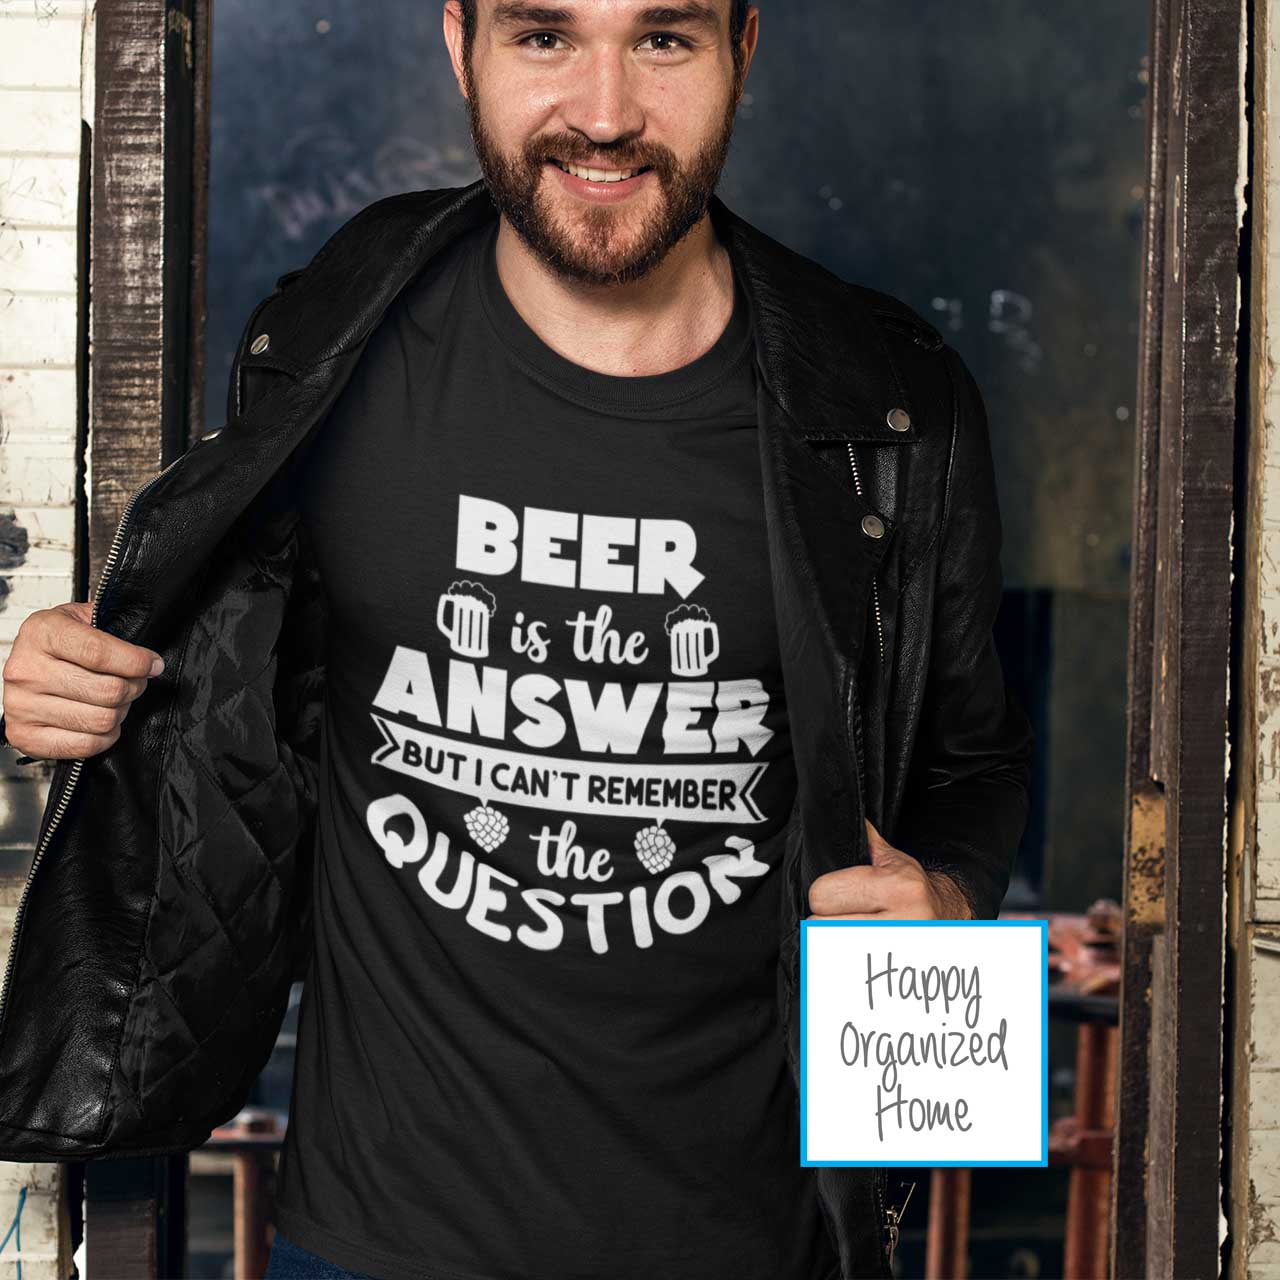 Beer is the answer, but I can't remember the question - Men's cotton t-shirt